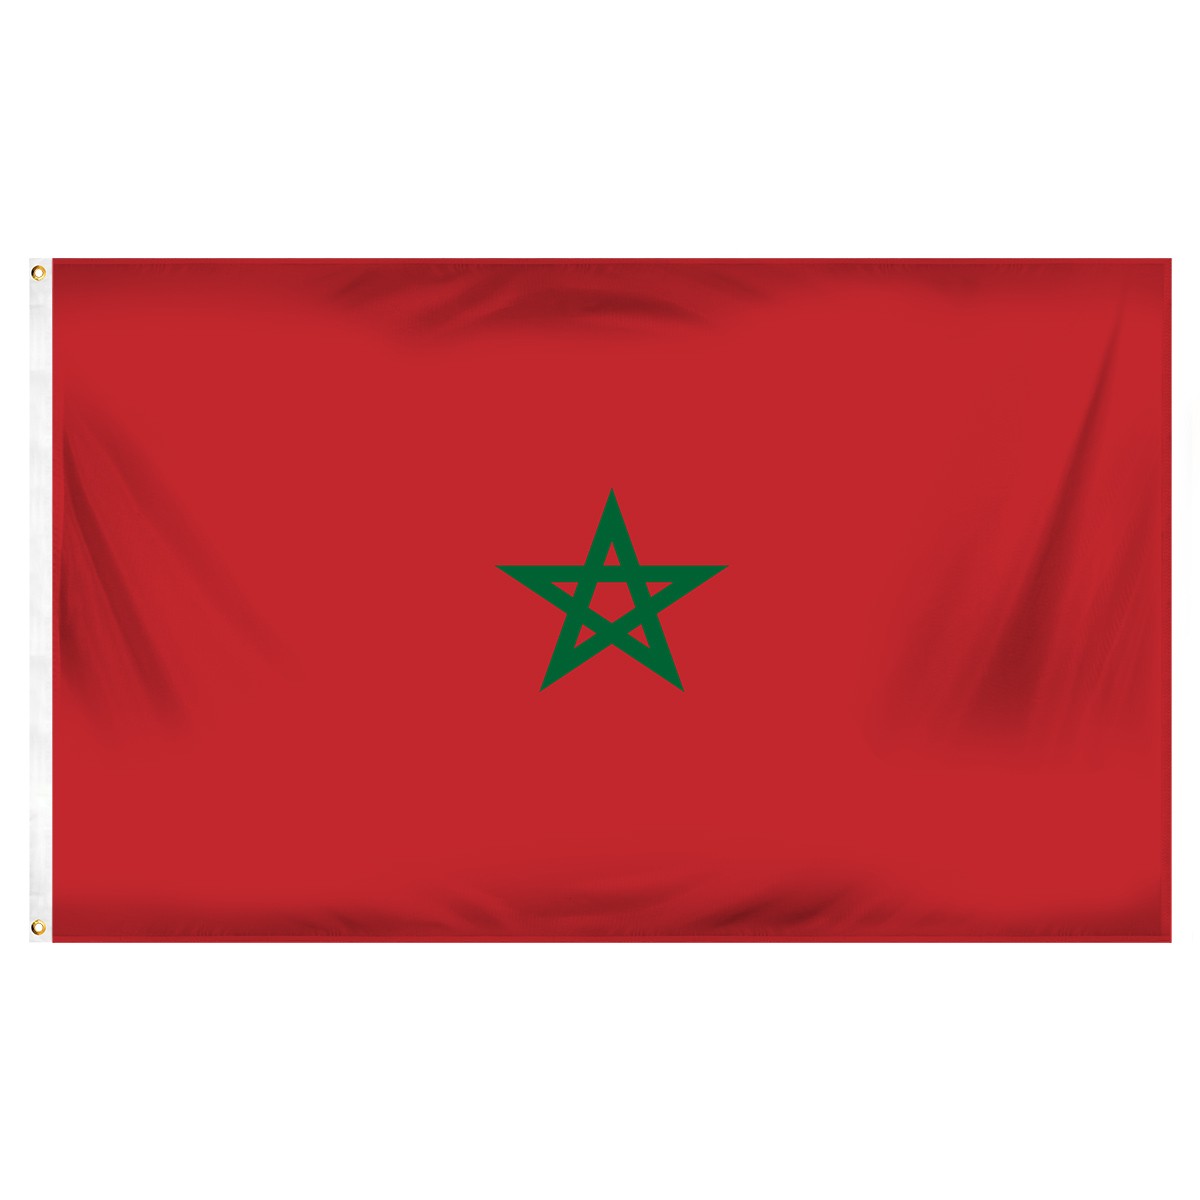 Morocco Posters and Banners